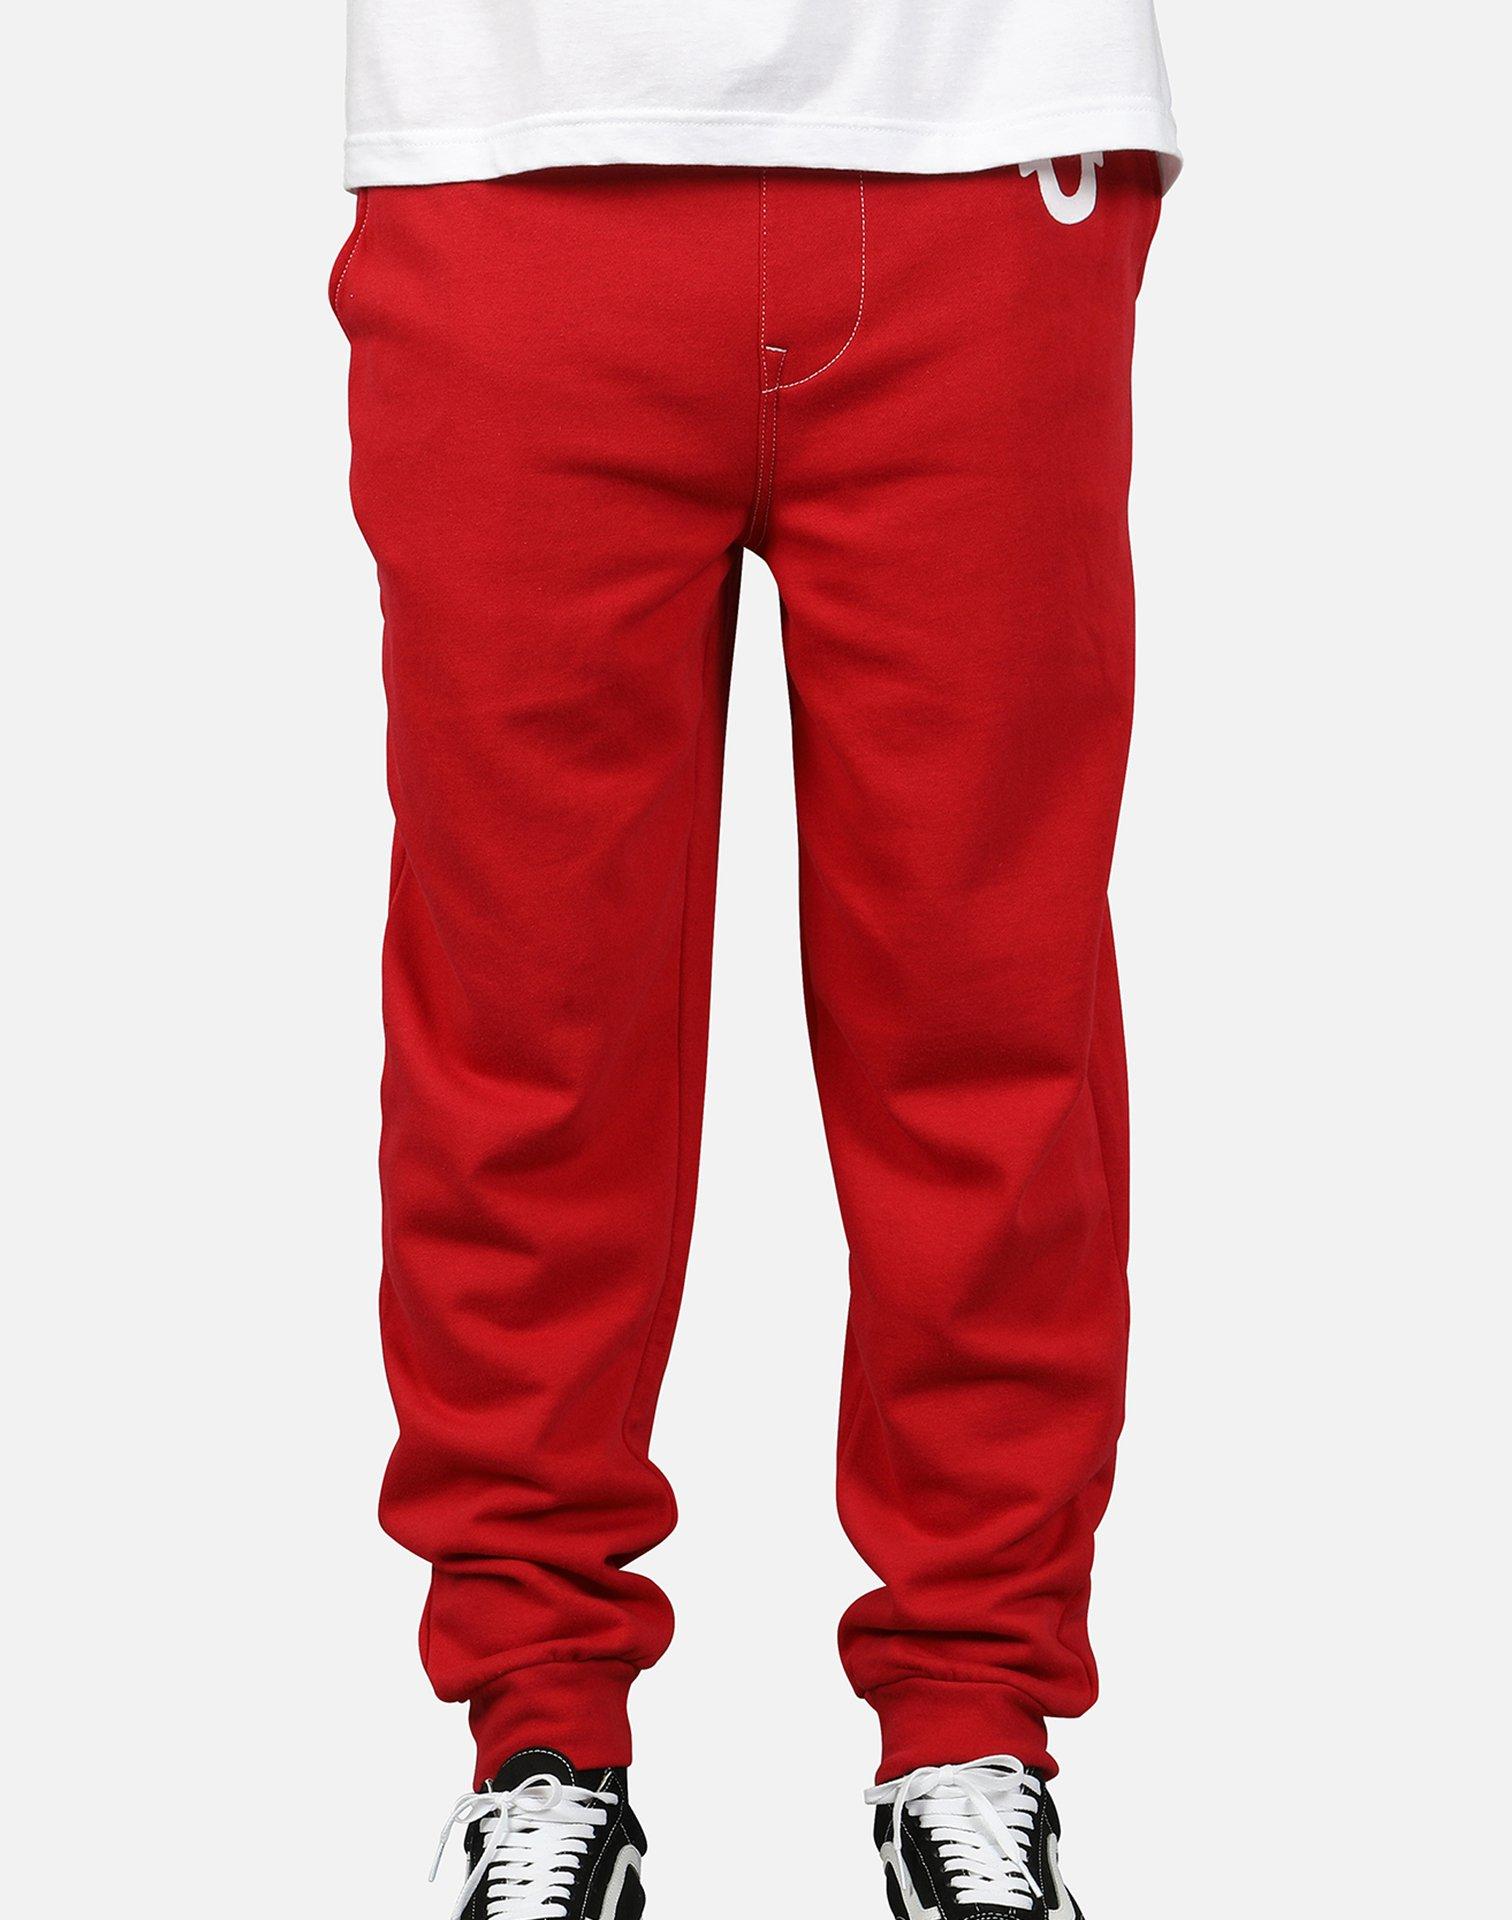 True Religion Classic Logo JOGGER Pants in Red for Men - Lyst